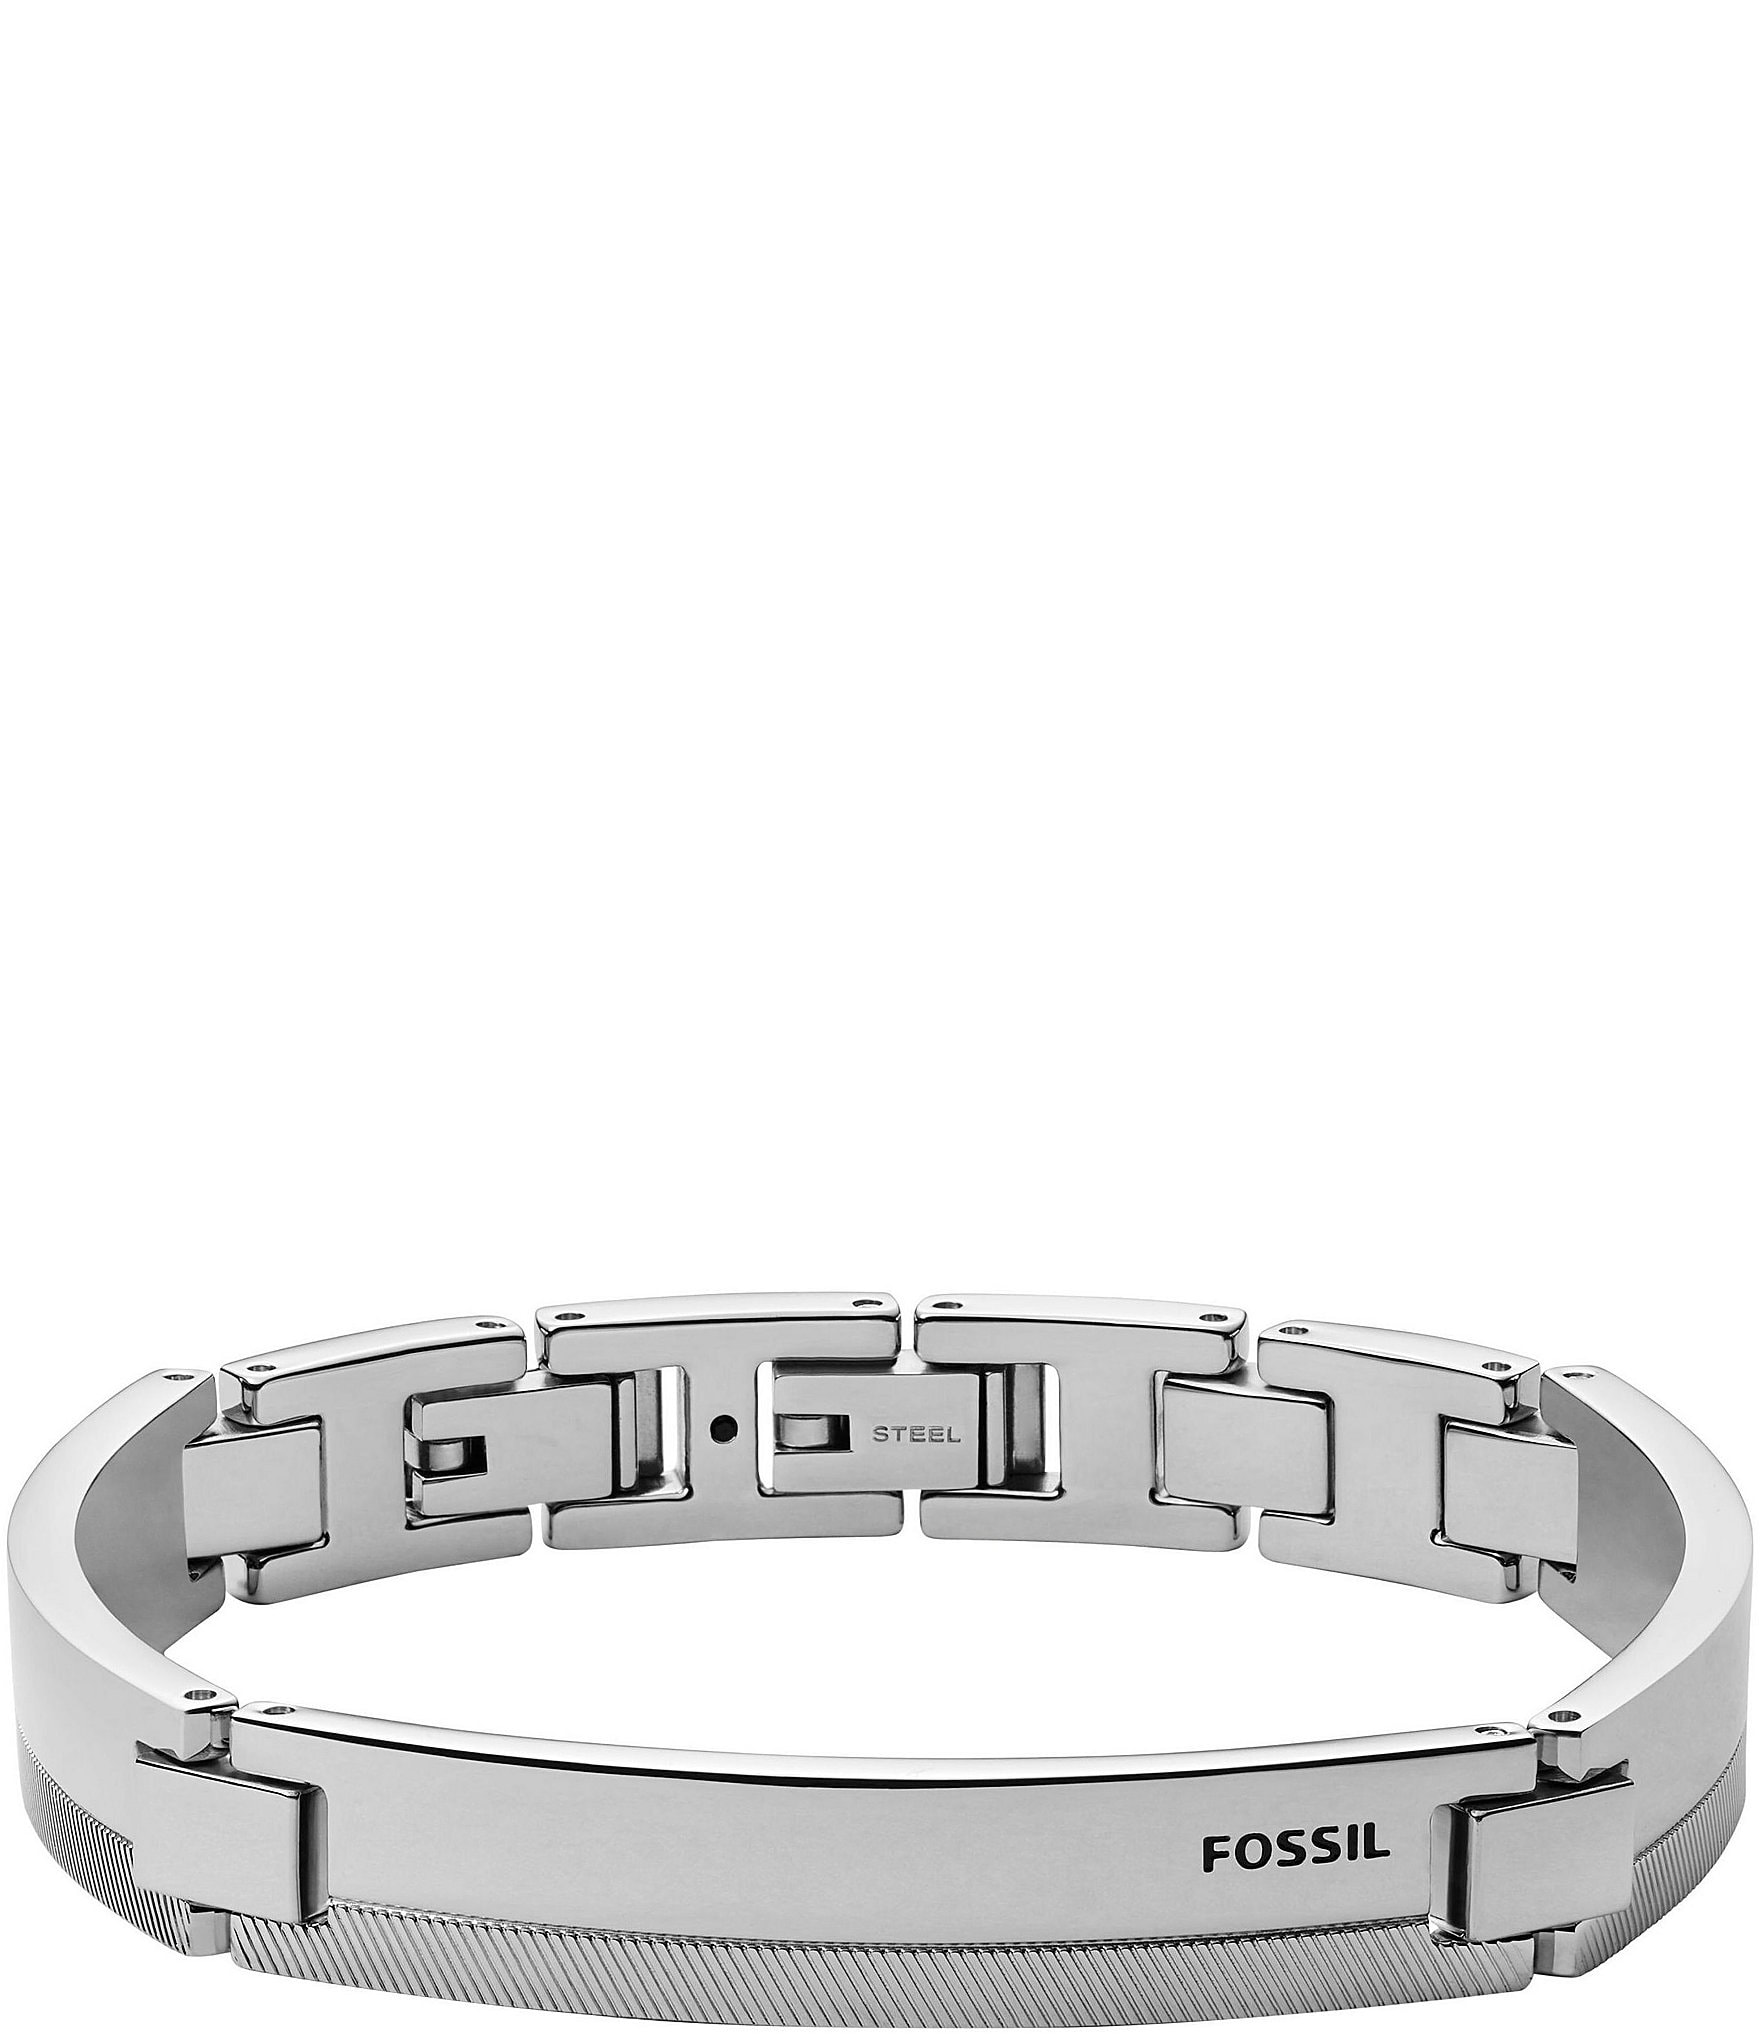 Fossil JR8001 Watch Band Grey Stainless Steel 12 mm - Watch Plaza